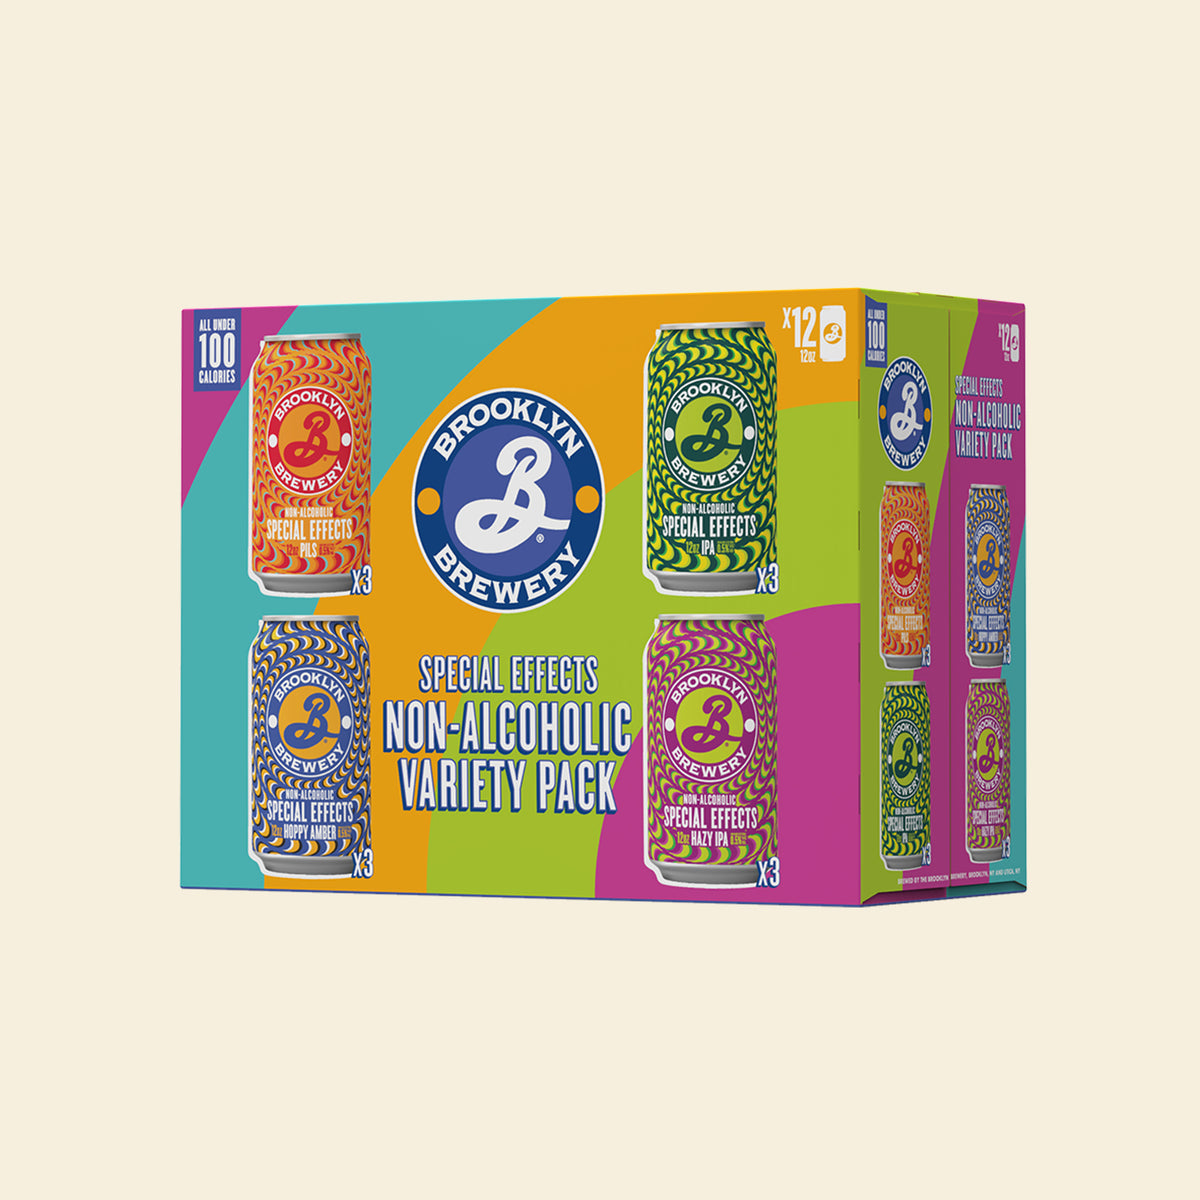 Brooklyn Special Effects Variety Pack Nonalcoholic Beer